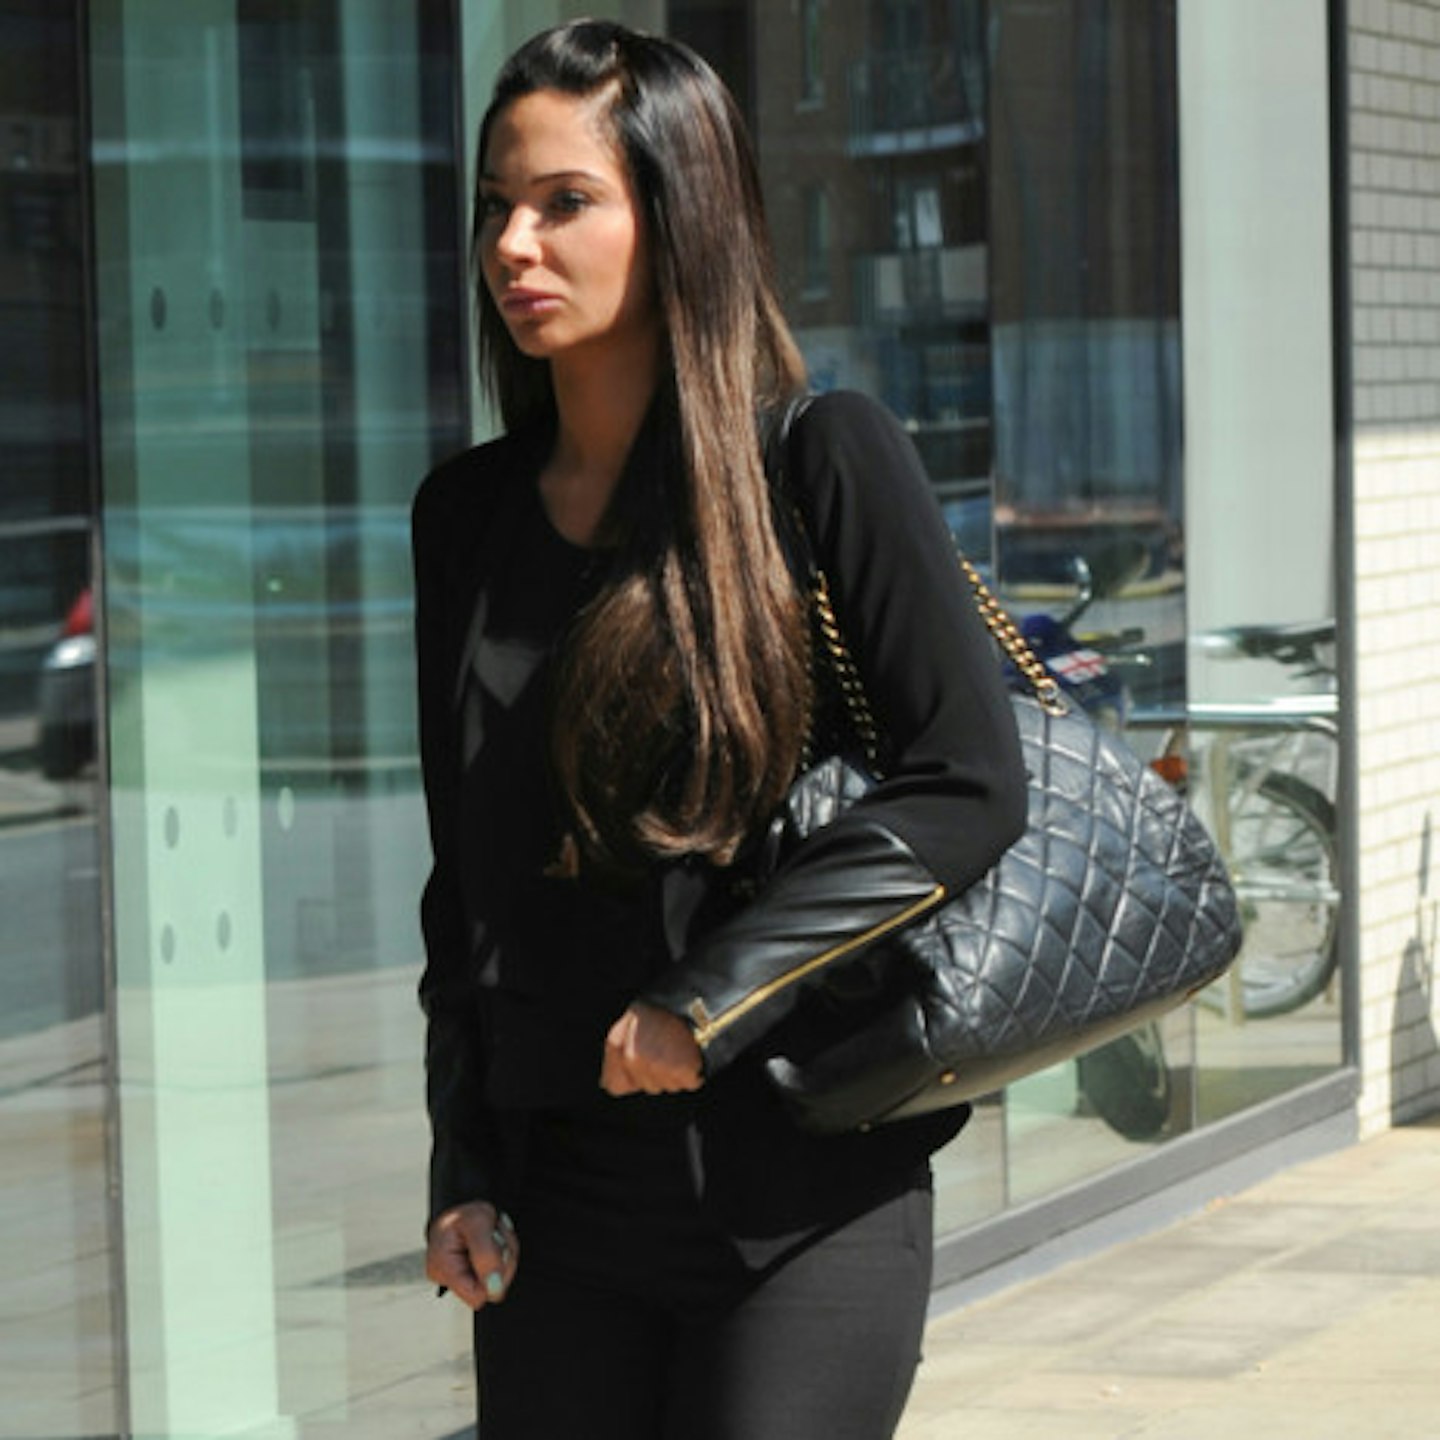 Tulisa arrived at court in Chelmsford this morning